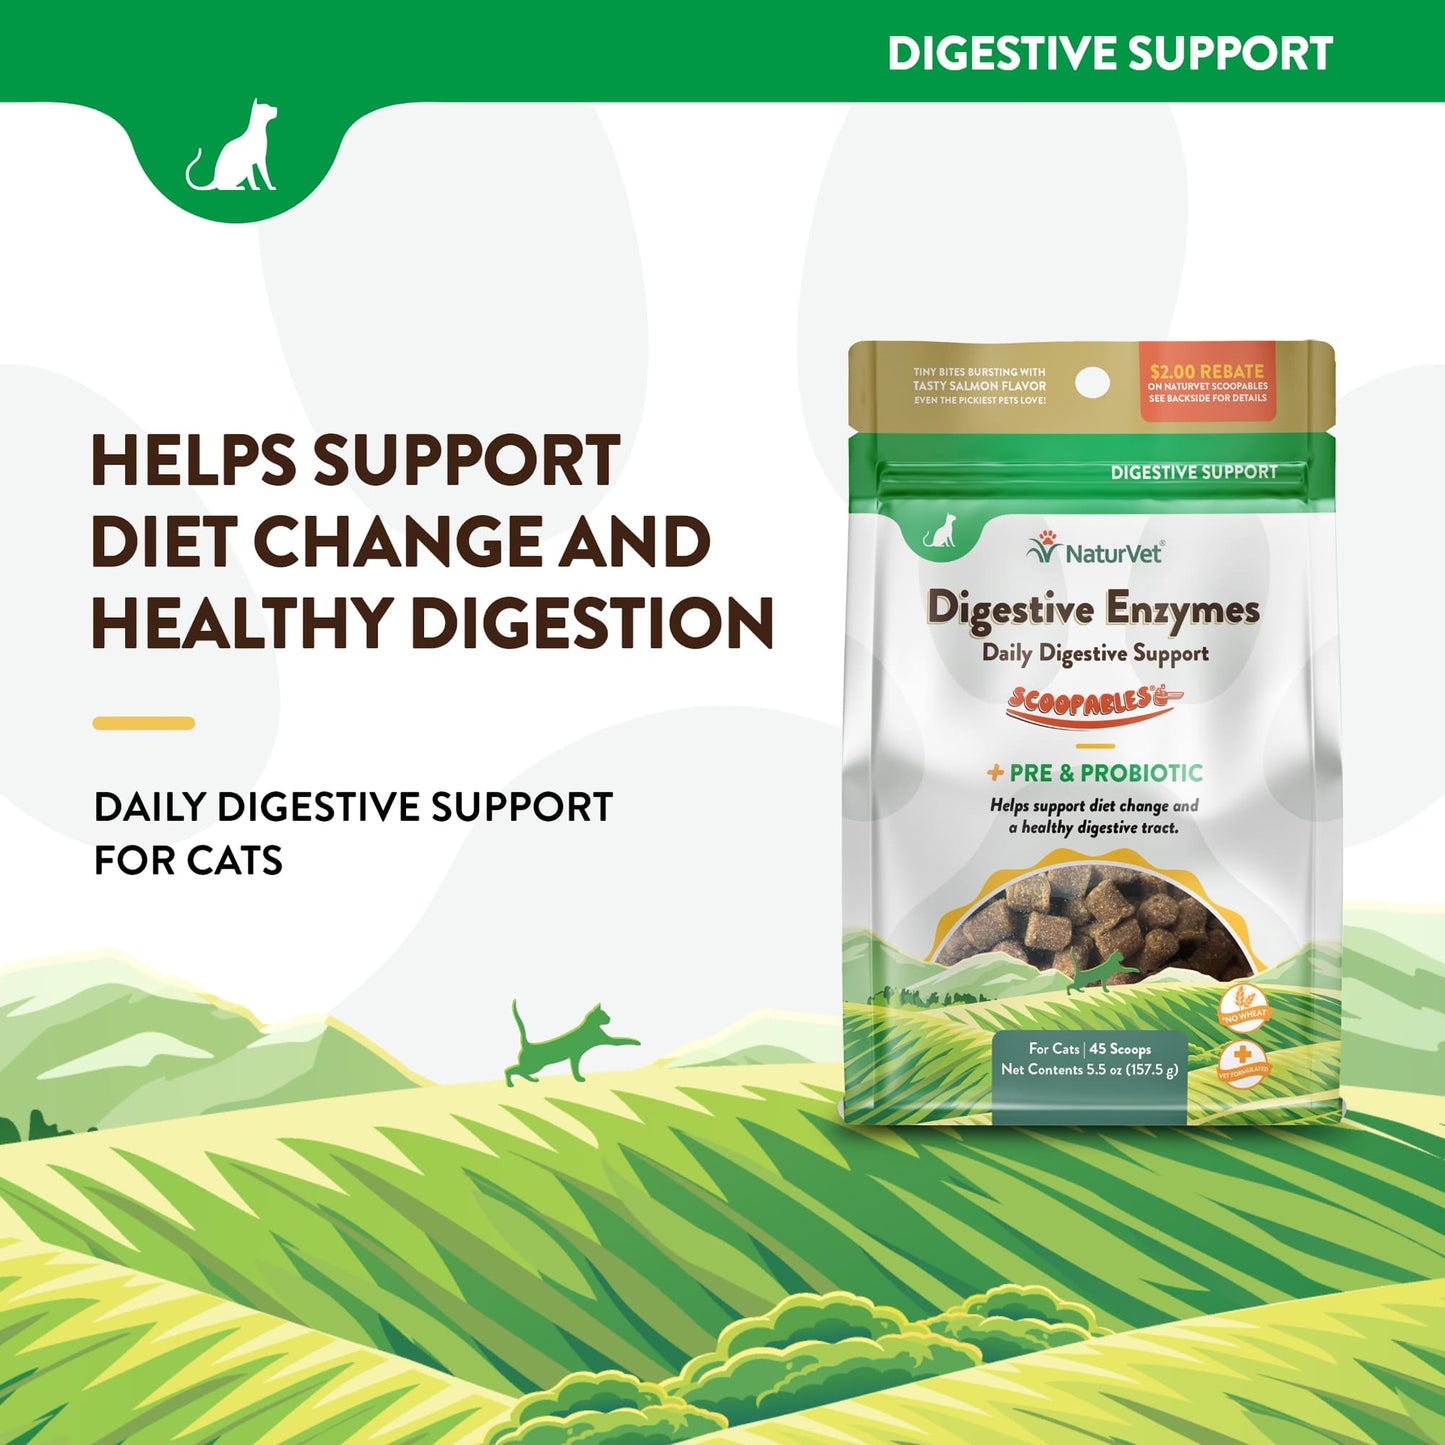 Scoopables Digestive Enzymes Daily Digestive Support for Cats